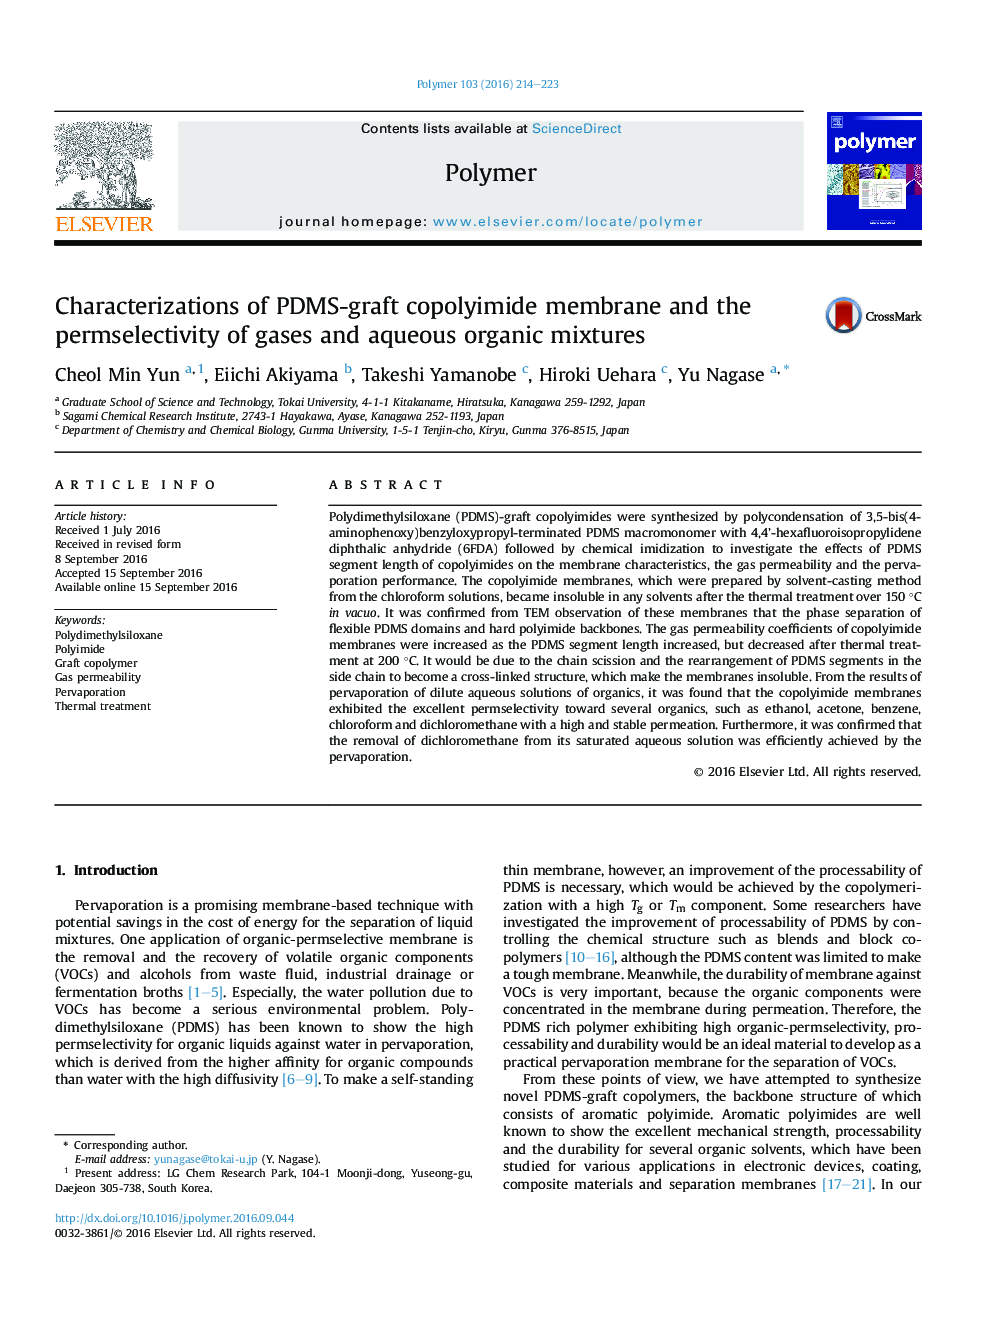 Characterizations of PDMS-graft copolyimide membrane and the permselectivity of gases and aqueous organic mixtures